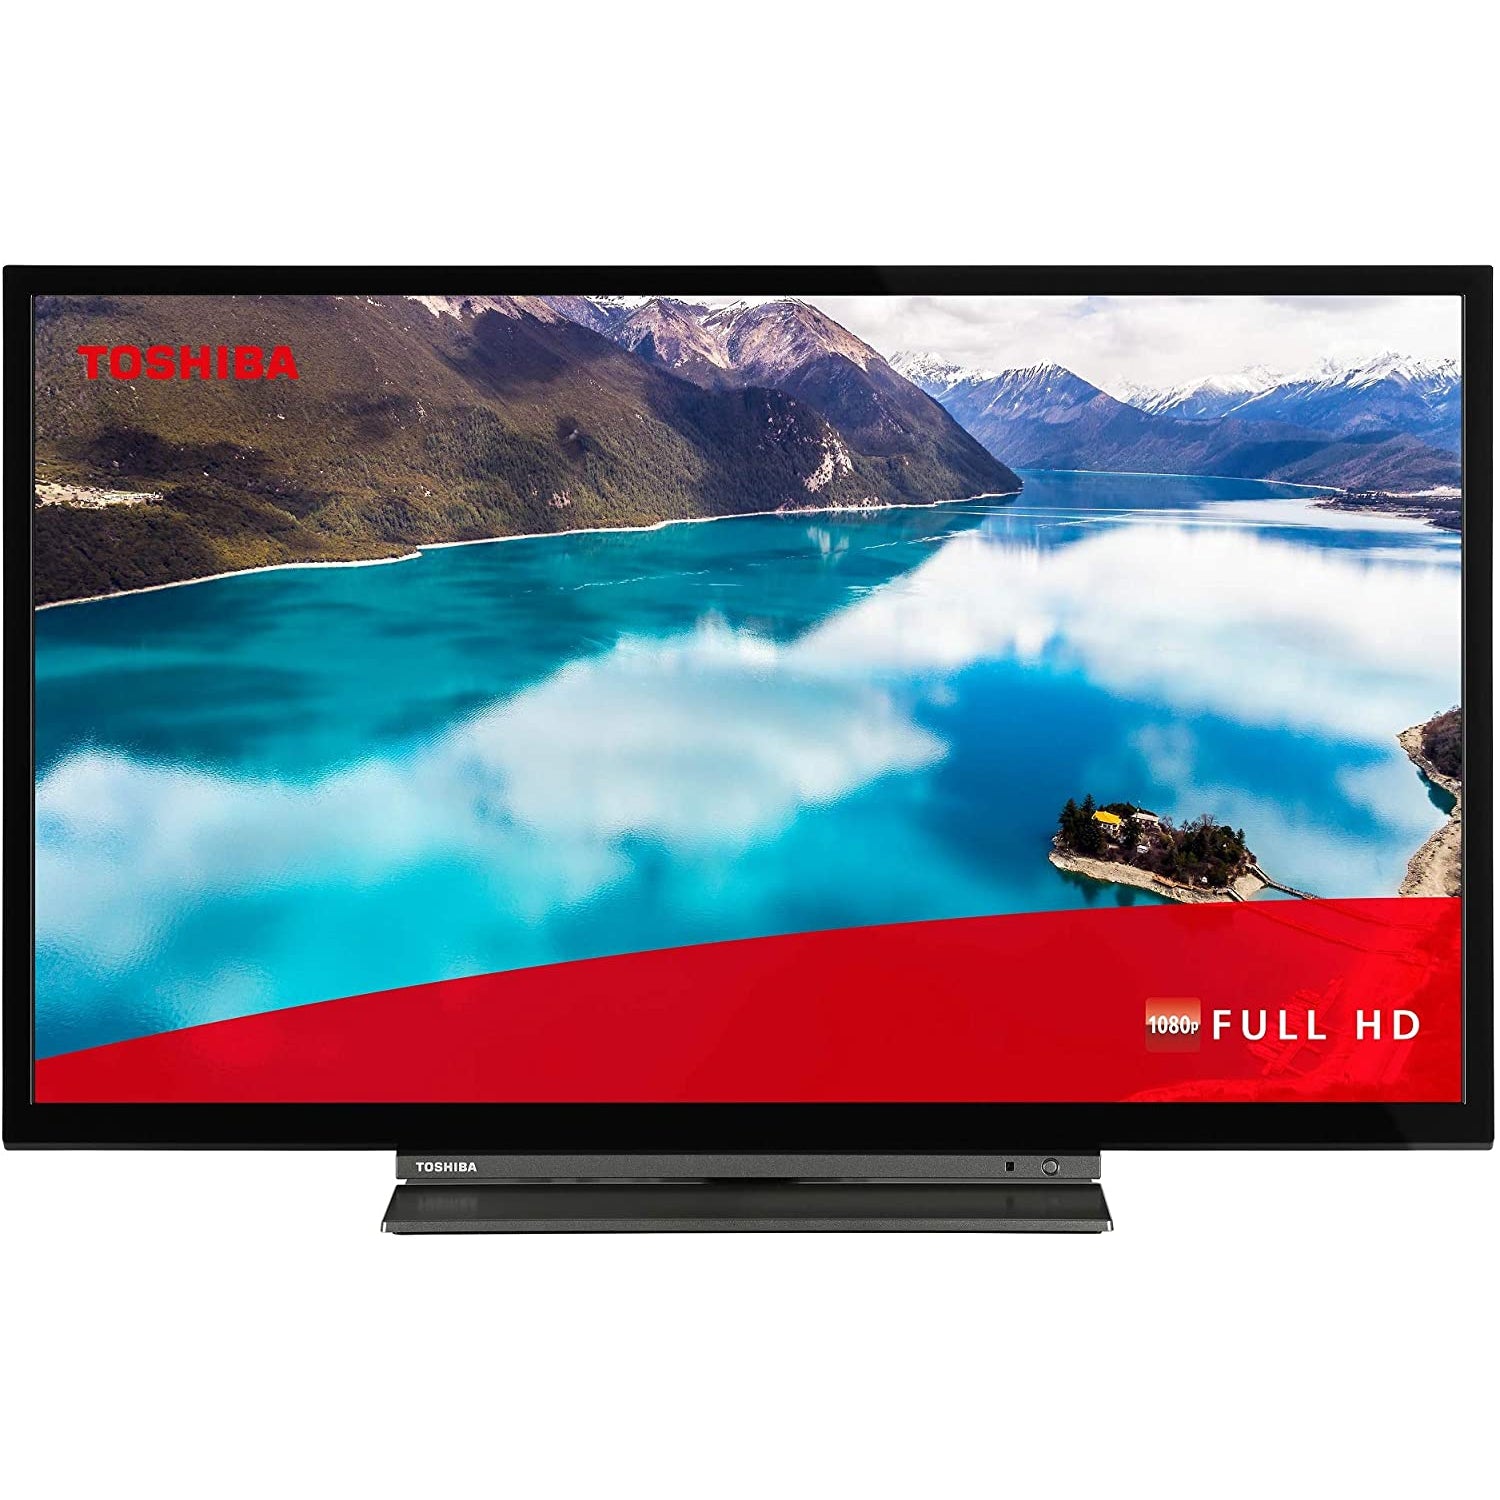 Toshiba 32LL3A63DB 32-Inch Smart Full-HD LED TV with Freeview Play - Black - Grade A